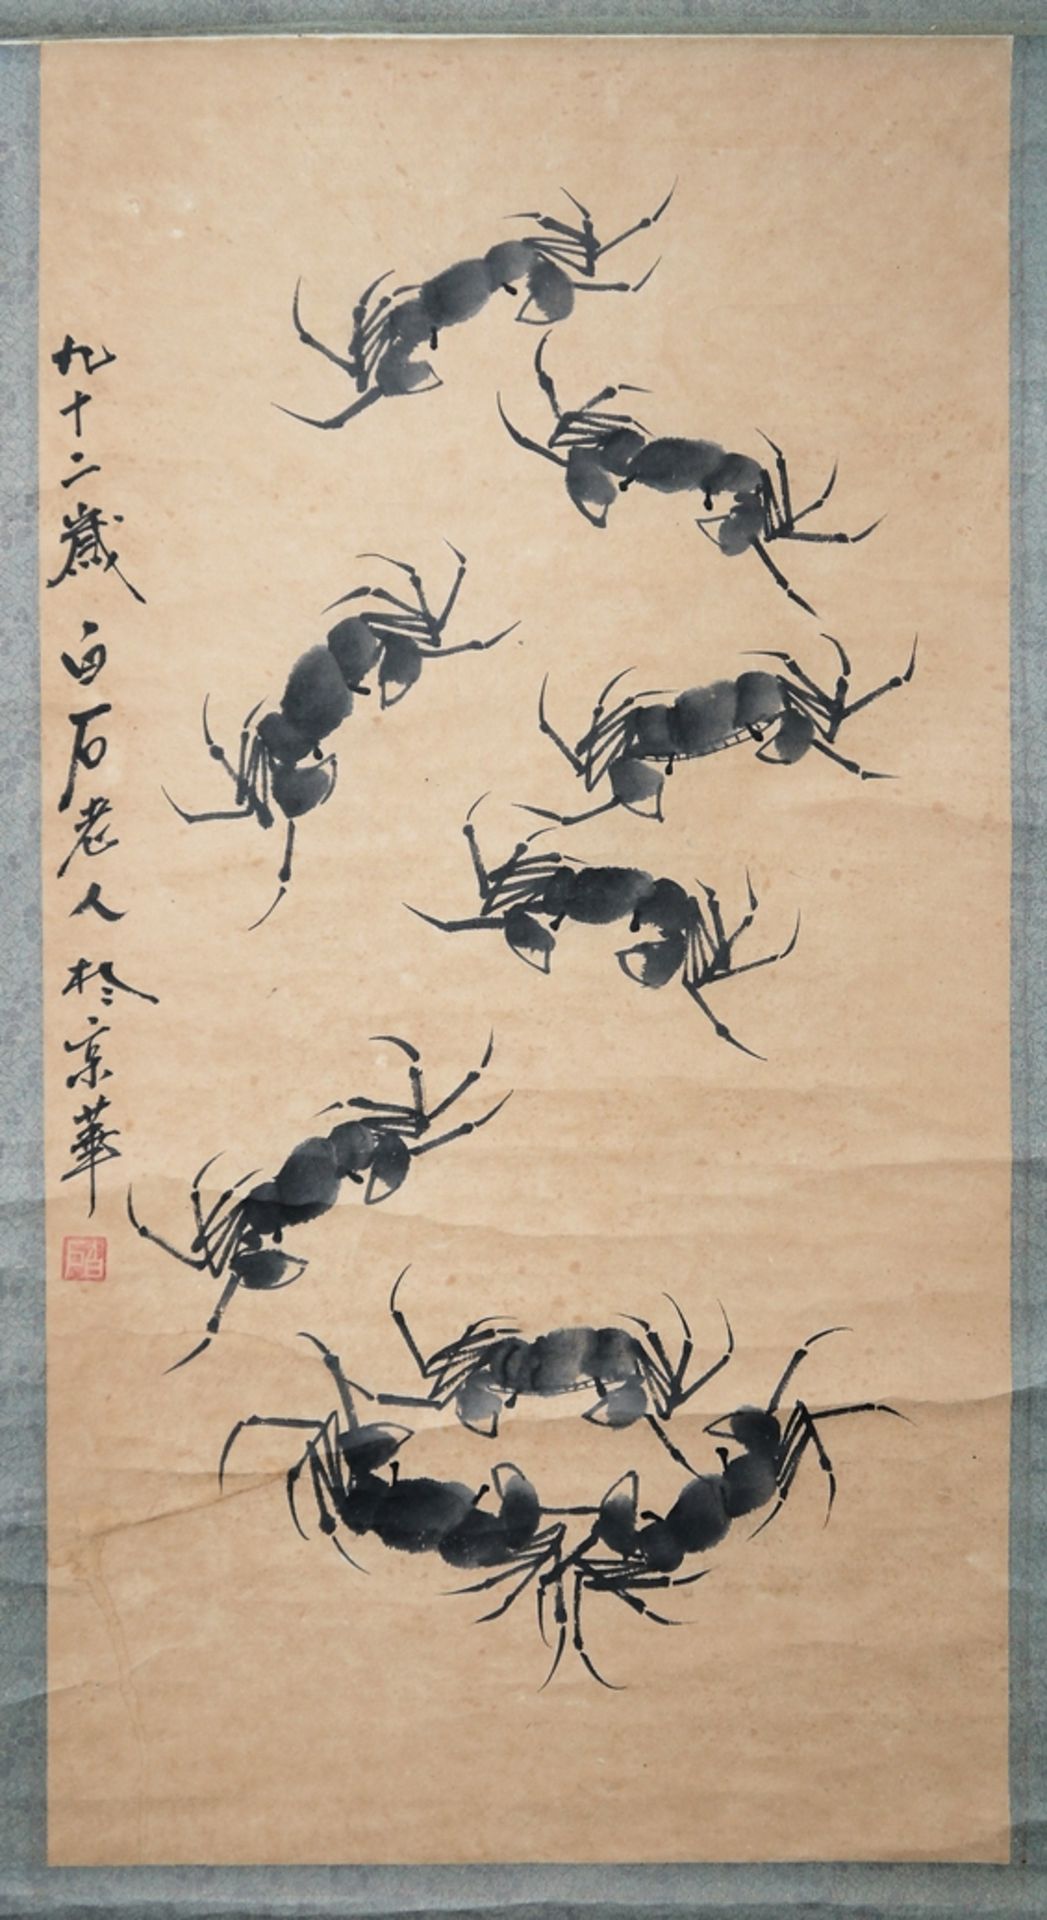 Lin Zongji, Nine Crabs, ink painting, China 20th century - Image 2 of 4